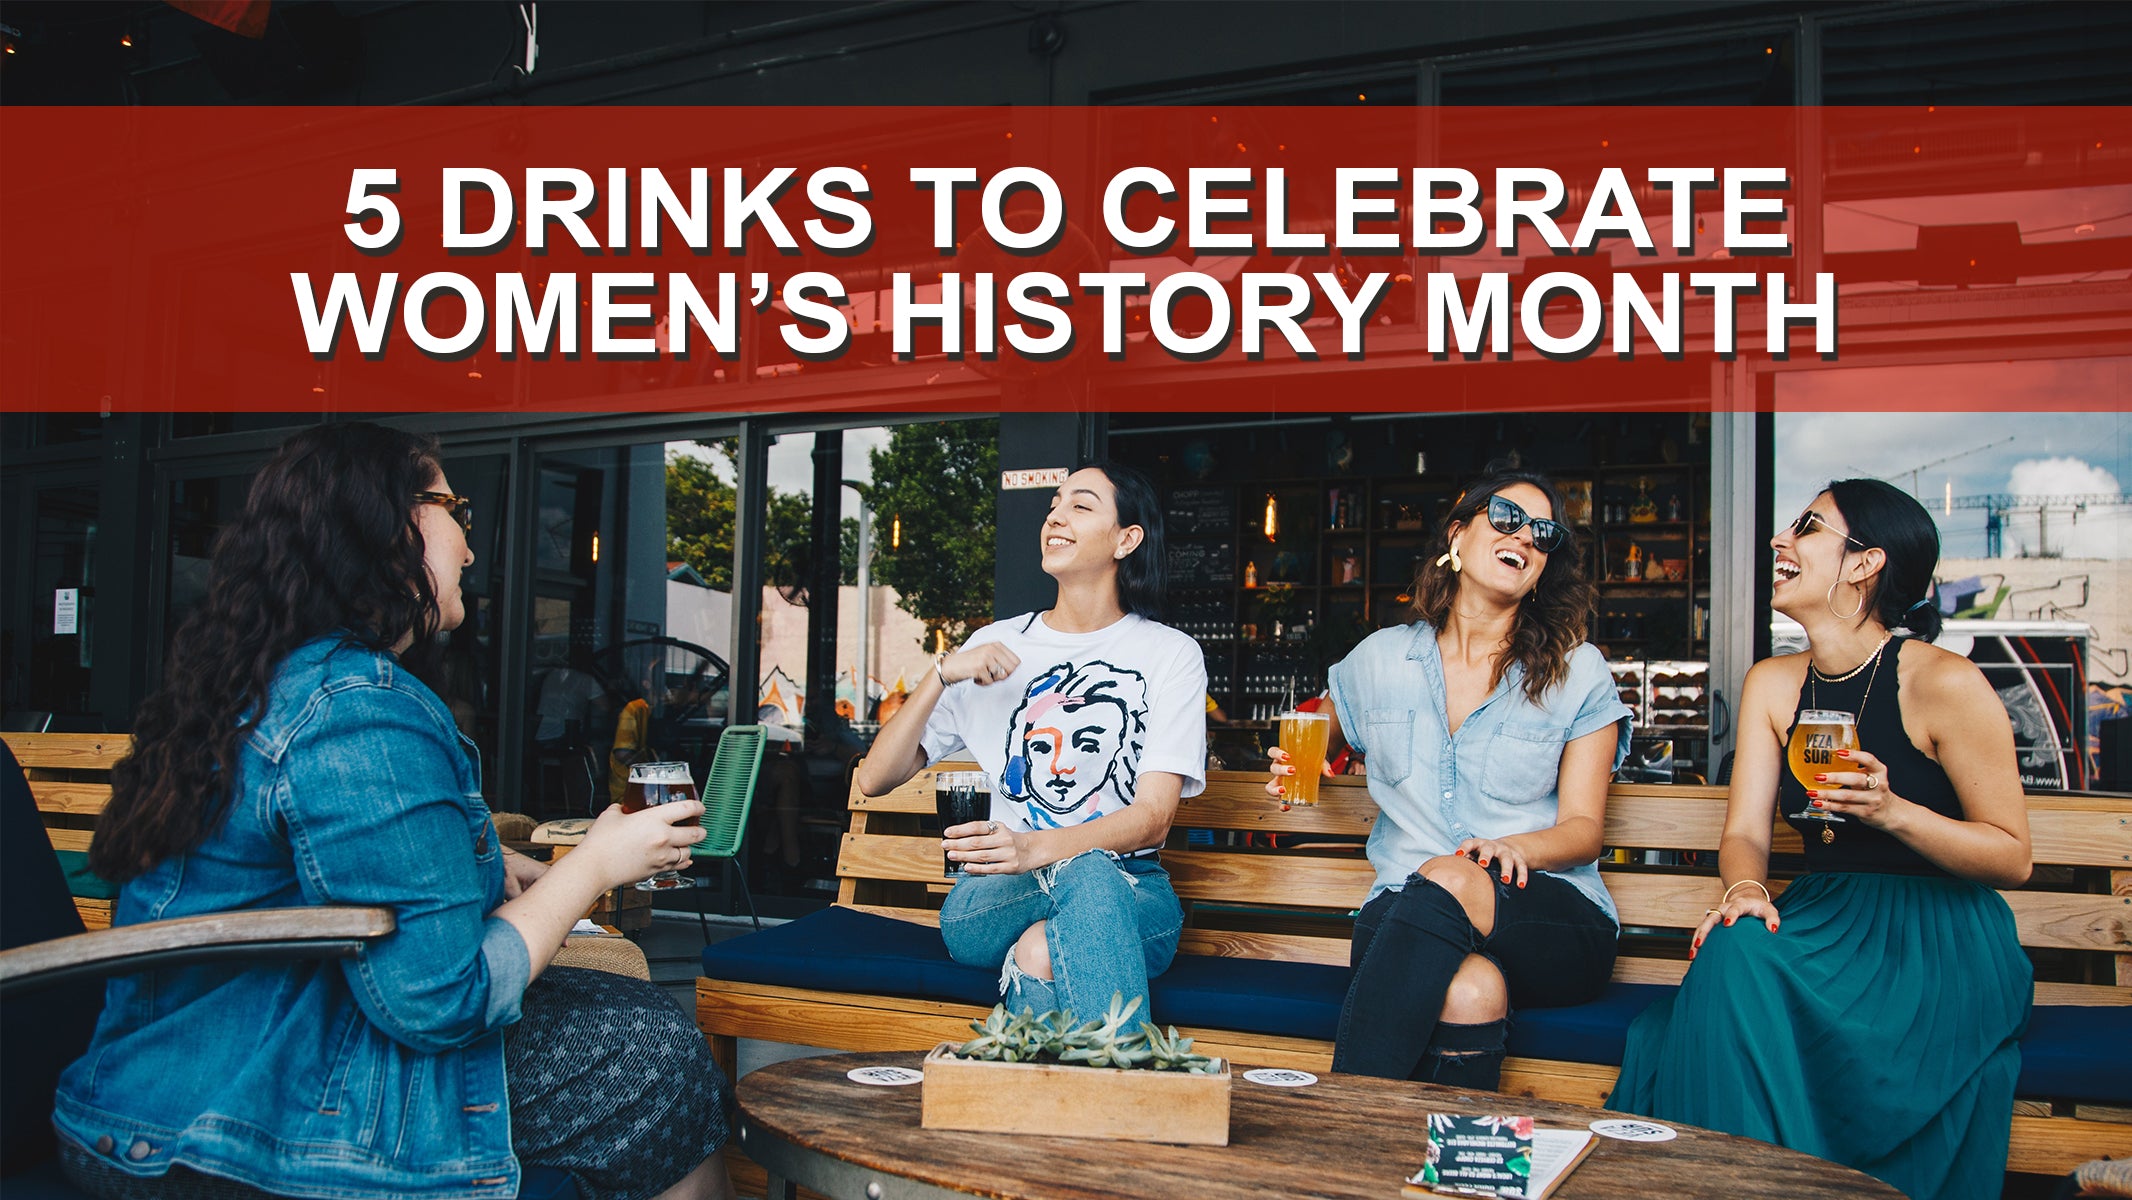 5 Drinks to Celebrate Women’s History Month